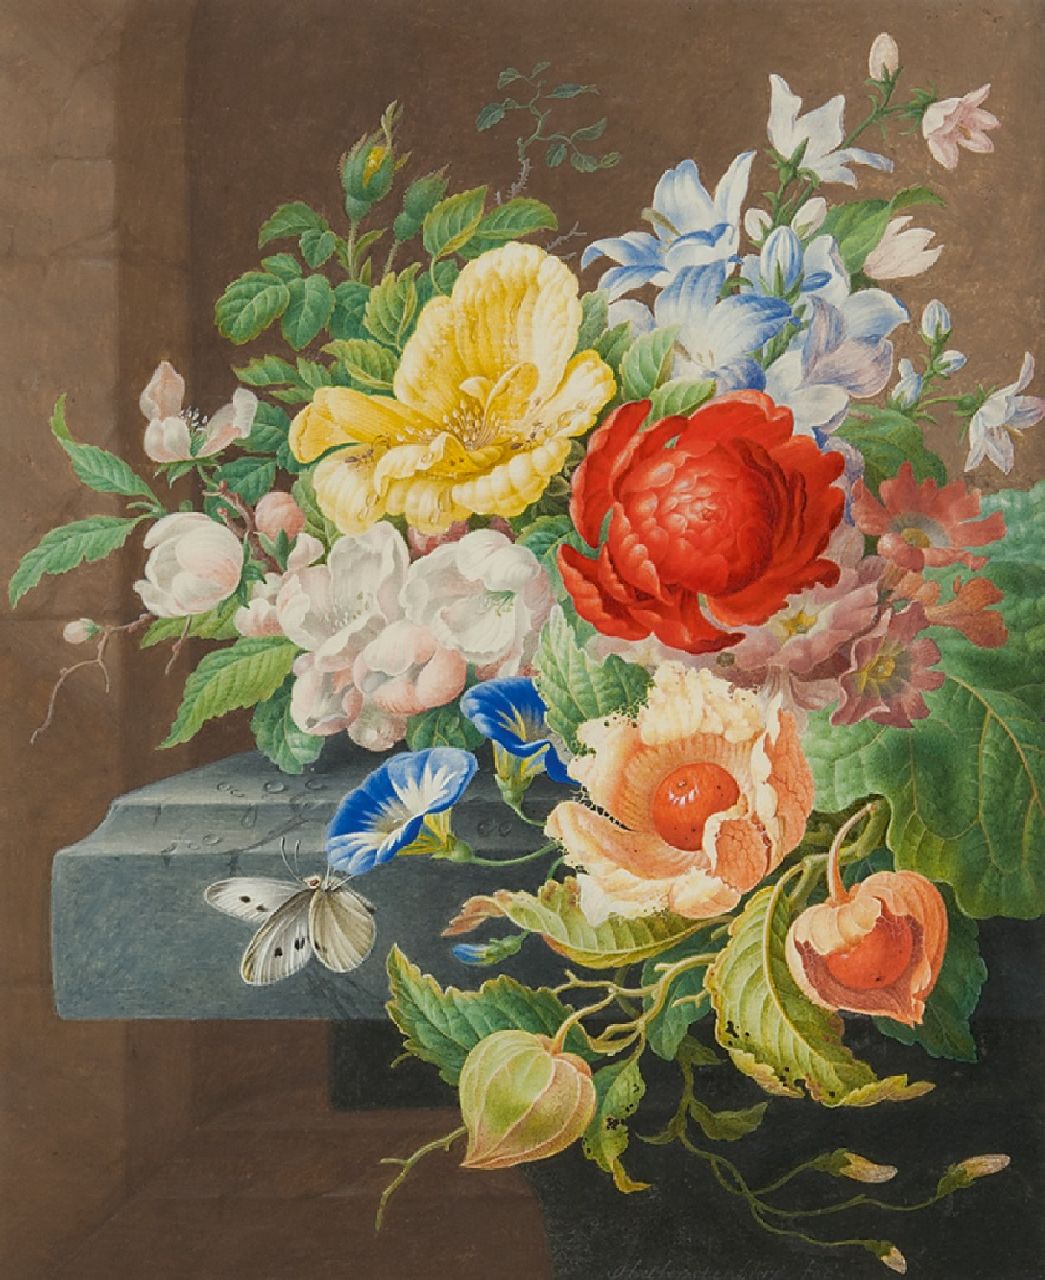 Henstenburgh H.  | Herman Henstenburgh | Watercolours and drawings offered for sale | Still life with flowers and a butterfly, watercolour on paper 31.0 x 25.5 cm, signed l.m. and te dateren ca. 1700